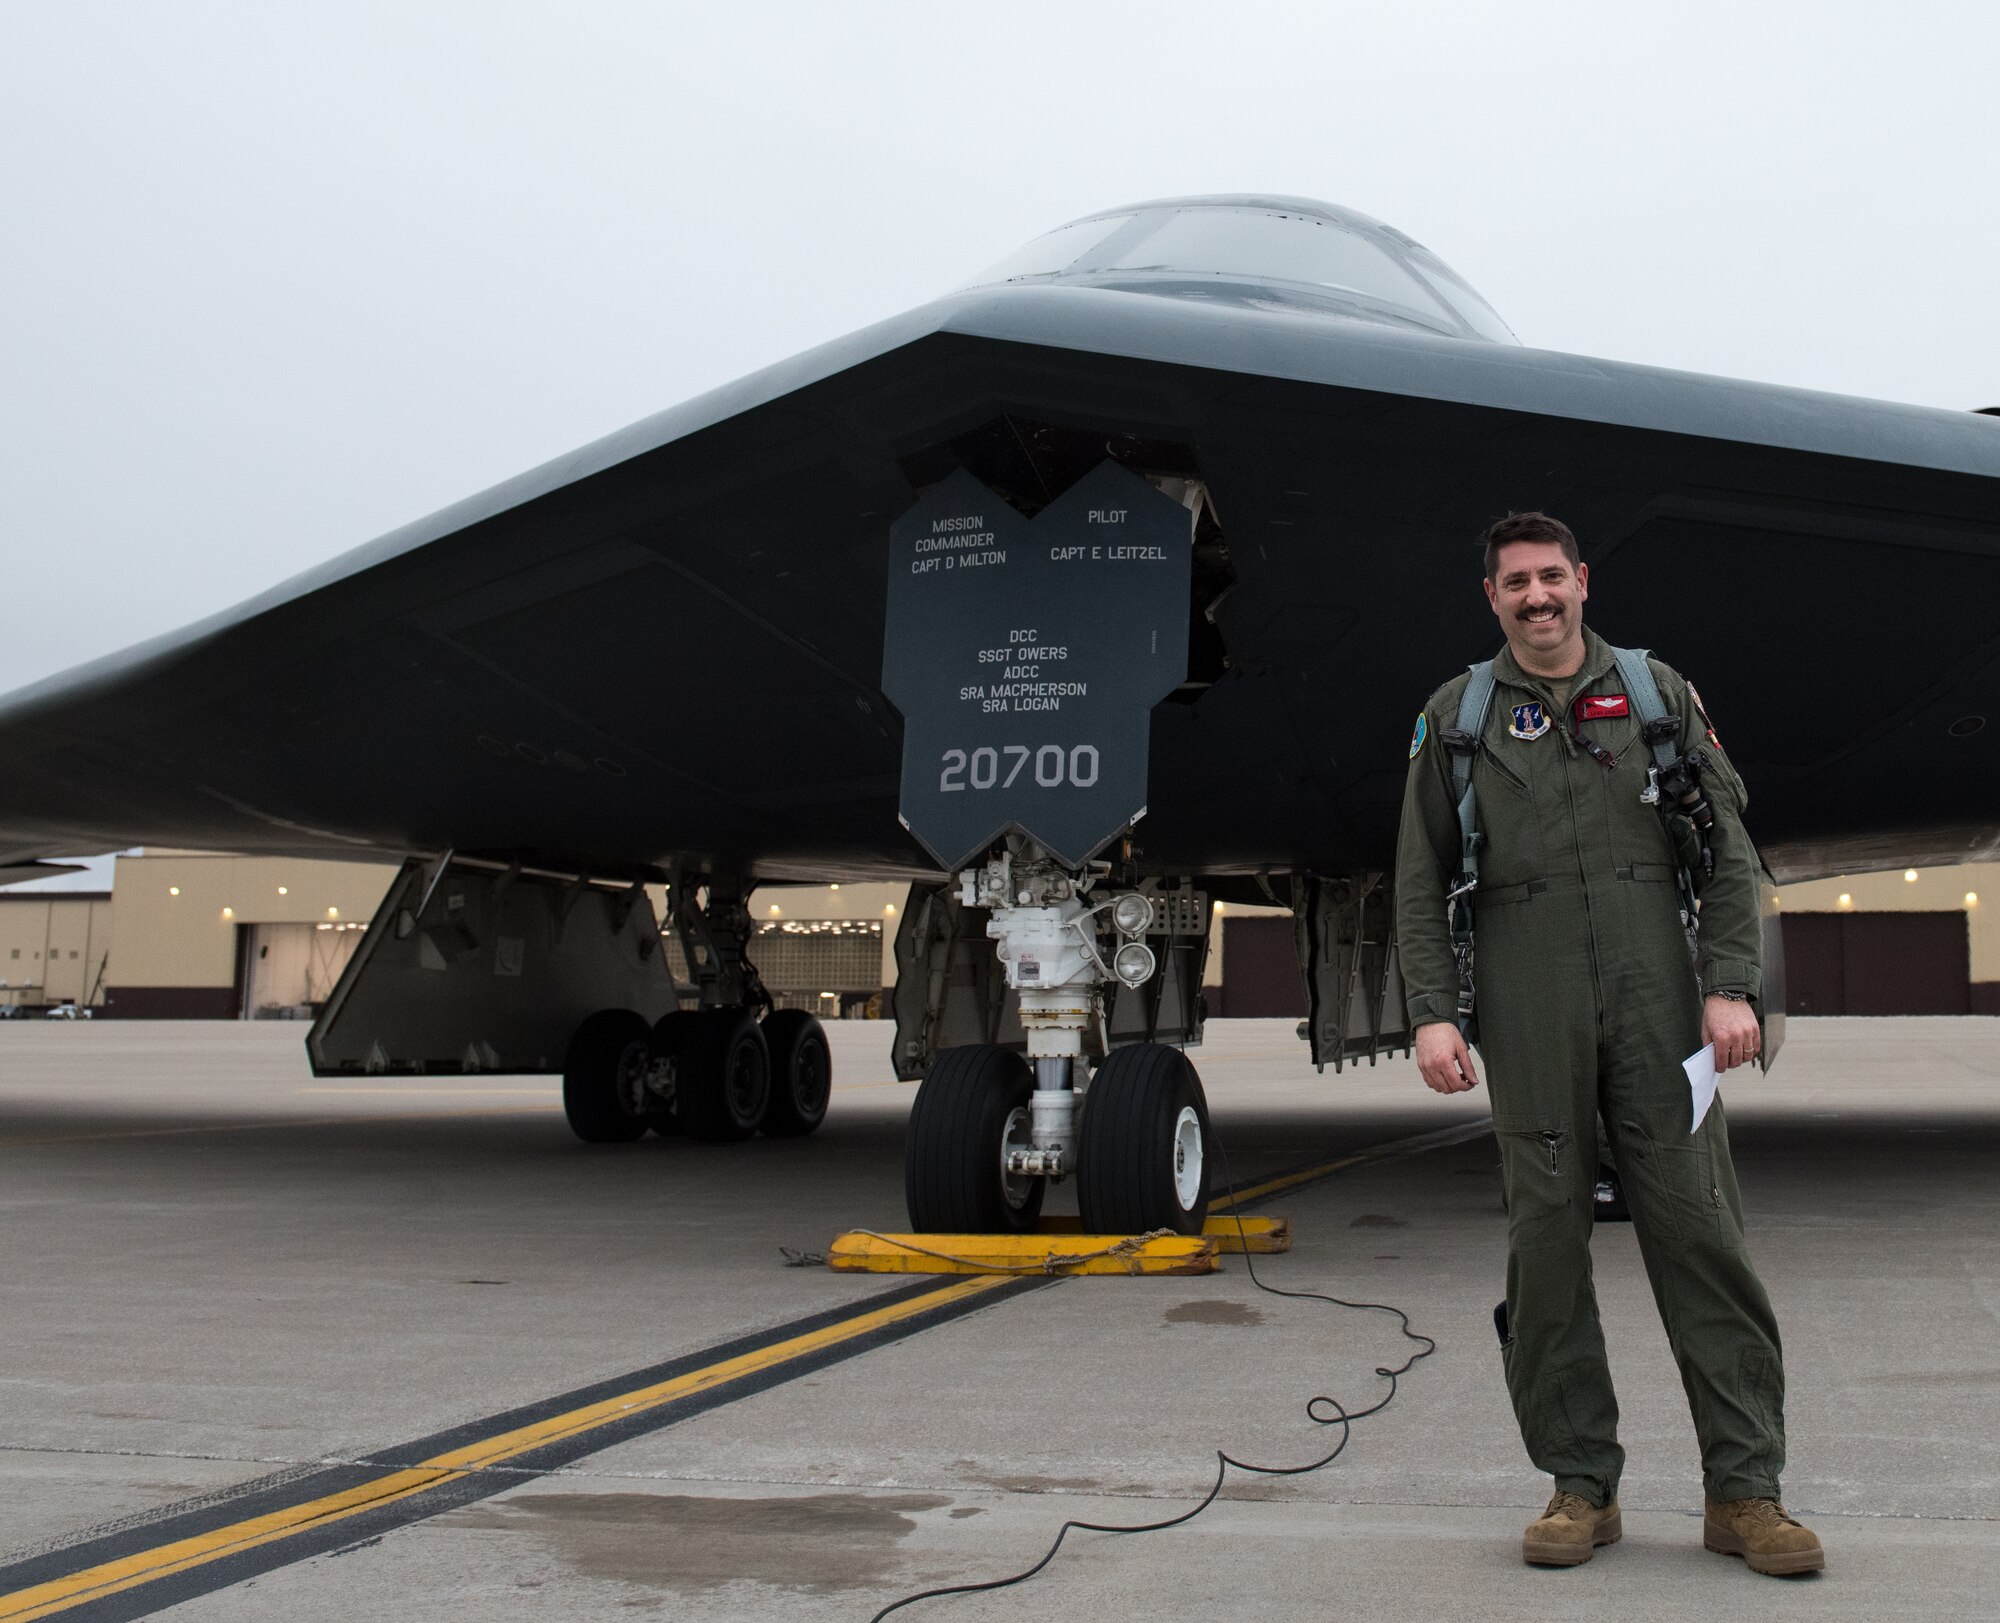 U.S. Air Force Lt. Col. James Ashlock, 131st Bomb Wing director of plans and programs, stands in front of a B-2 Spirit stealth bomber at Whiteman Air Force Base, Missouri, March 18, 2020. Throughout Ashlock’s career, he has completed 208 sorties,  during his final flight before retiring he reached the milestone of flying 1000 hours in a B-2. (U.S. Air Force photo by Airman 1st Class Christina Carter)